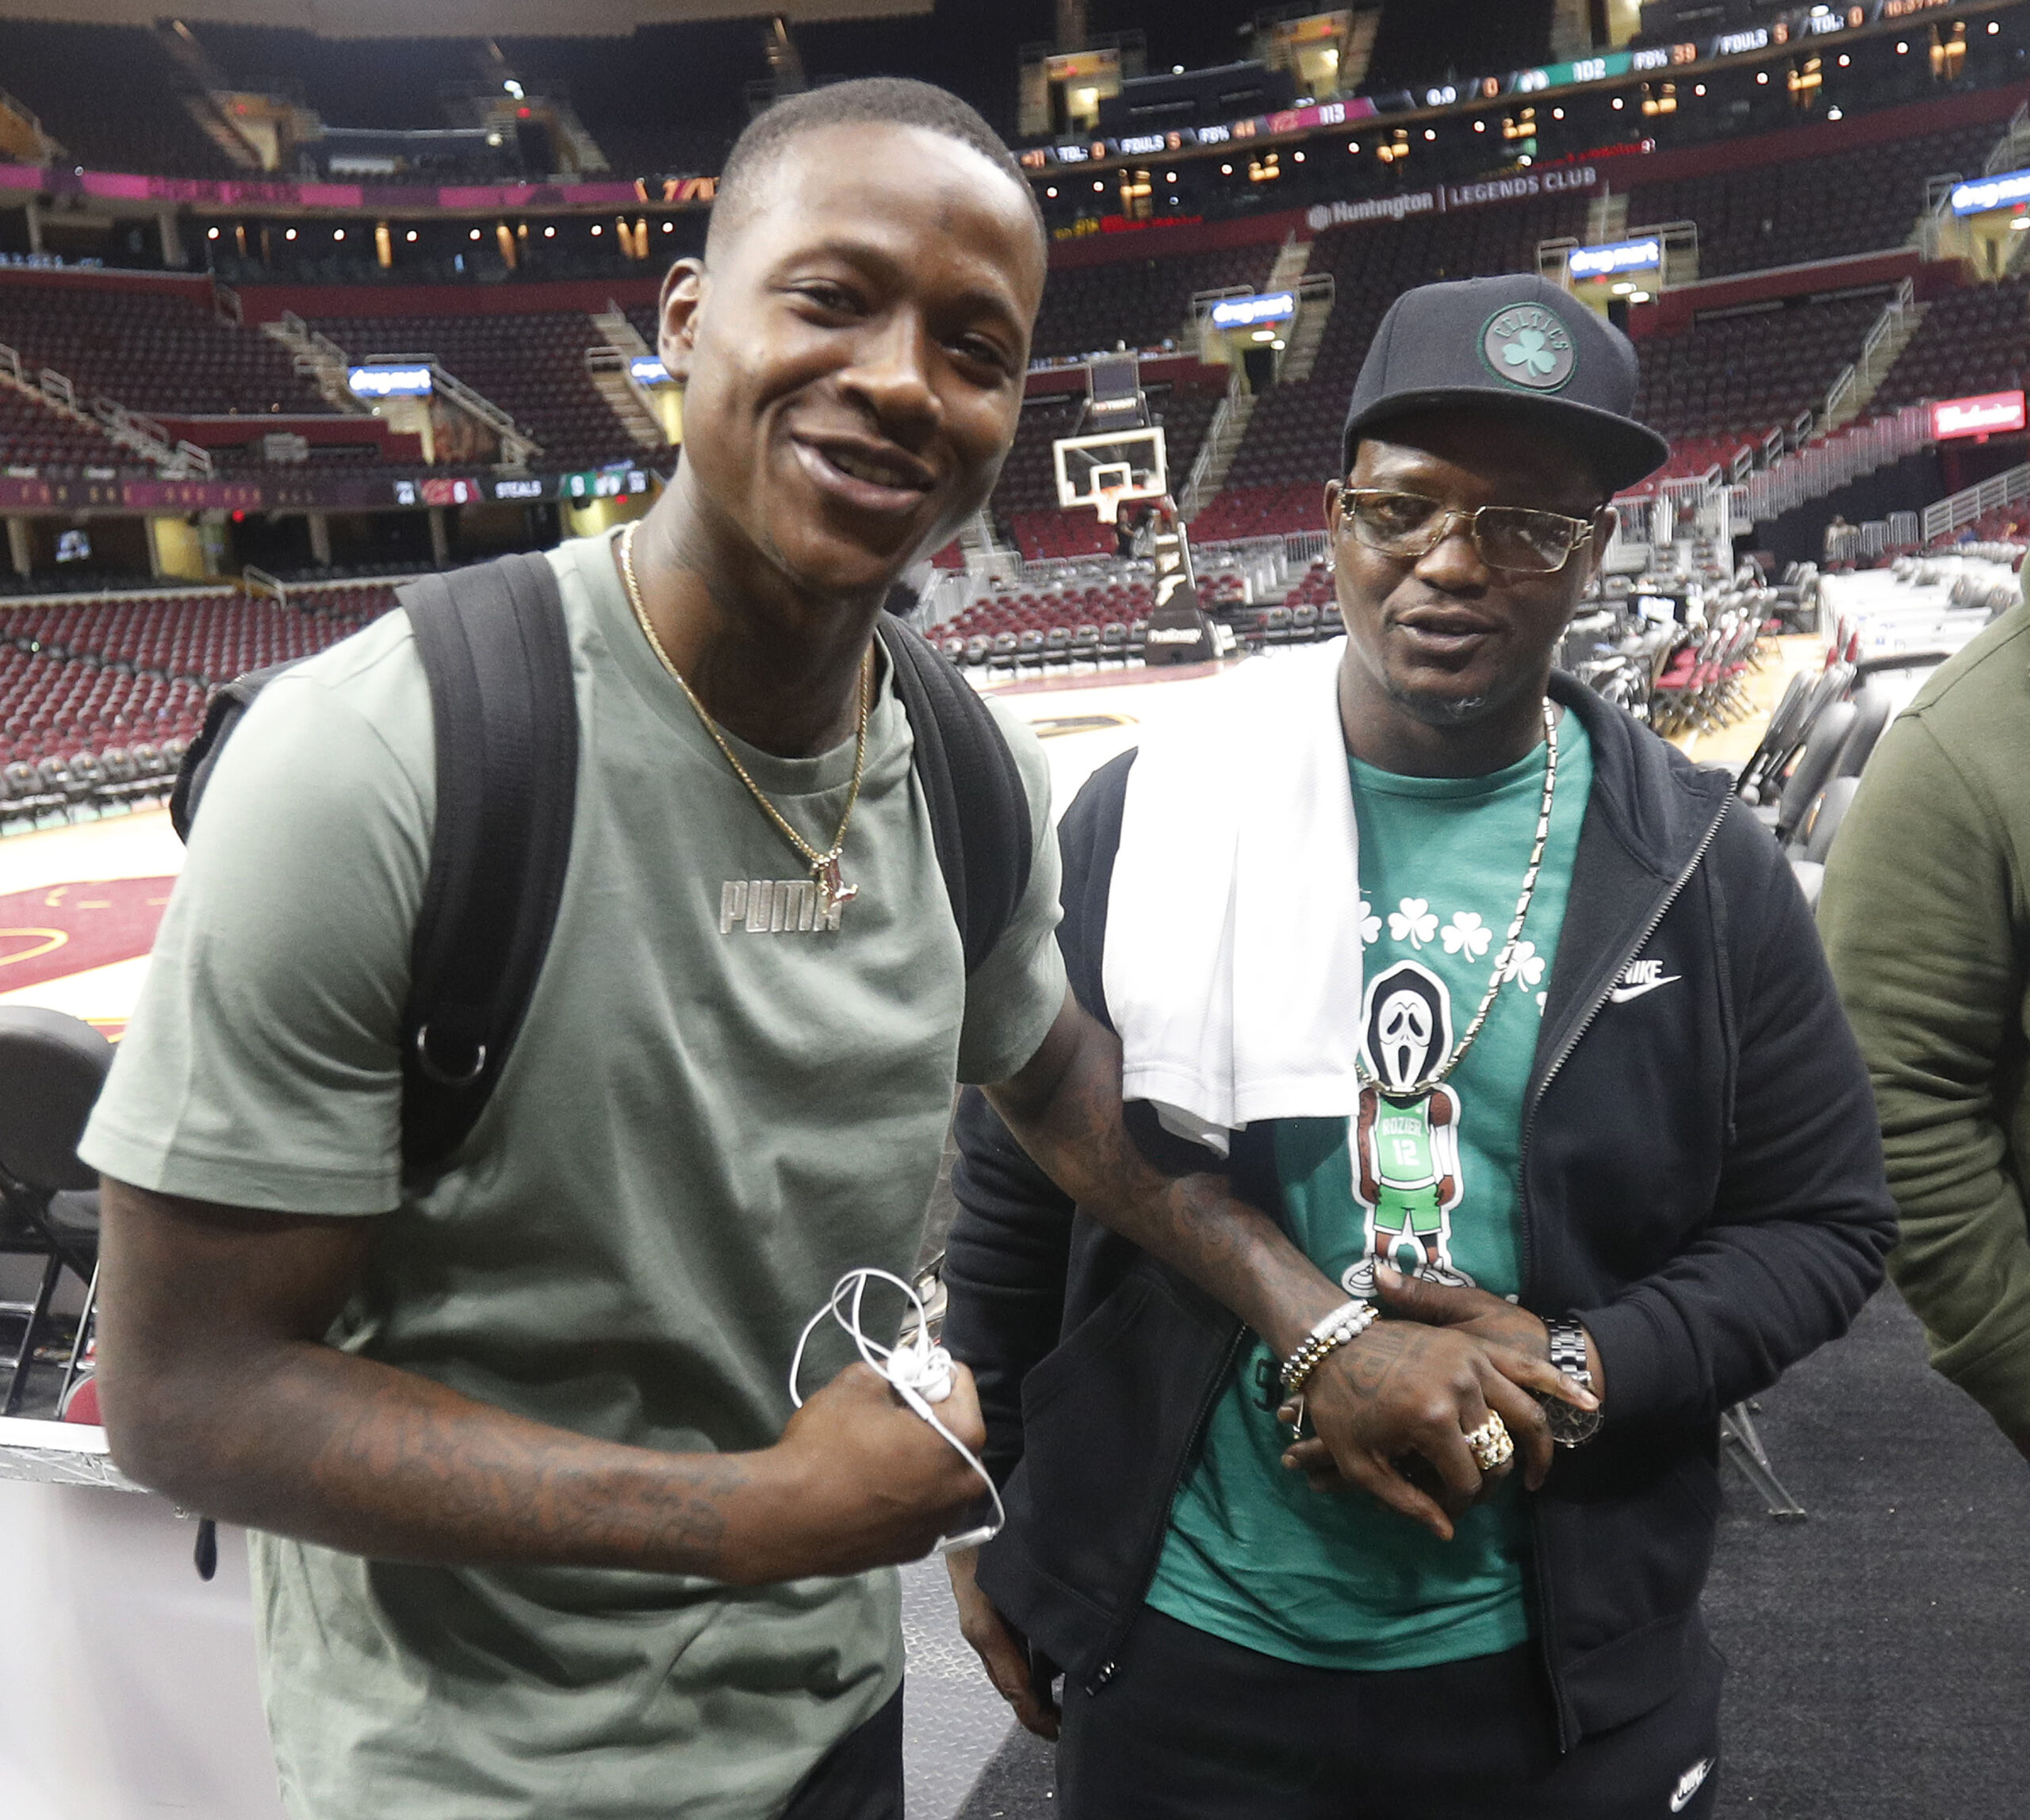 Terry with his father in the arena (bostonglobe.com)